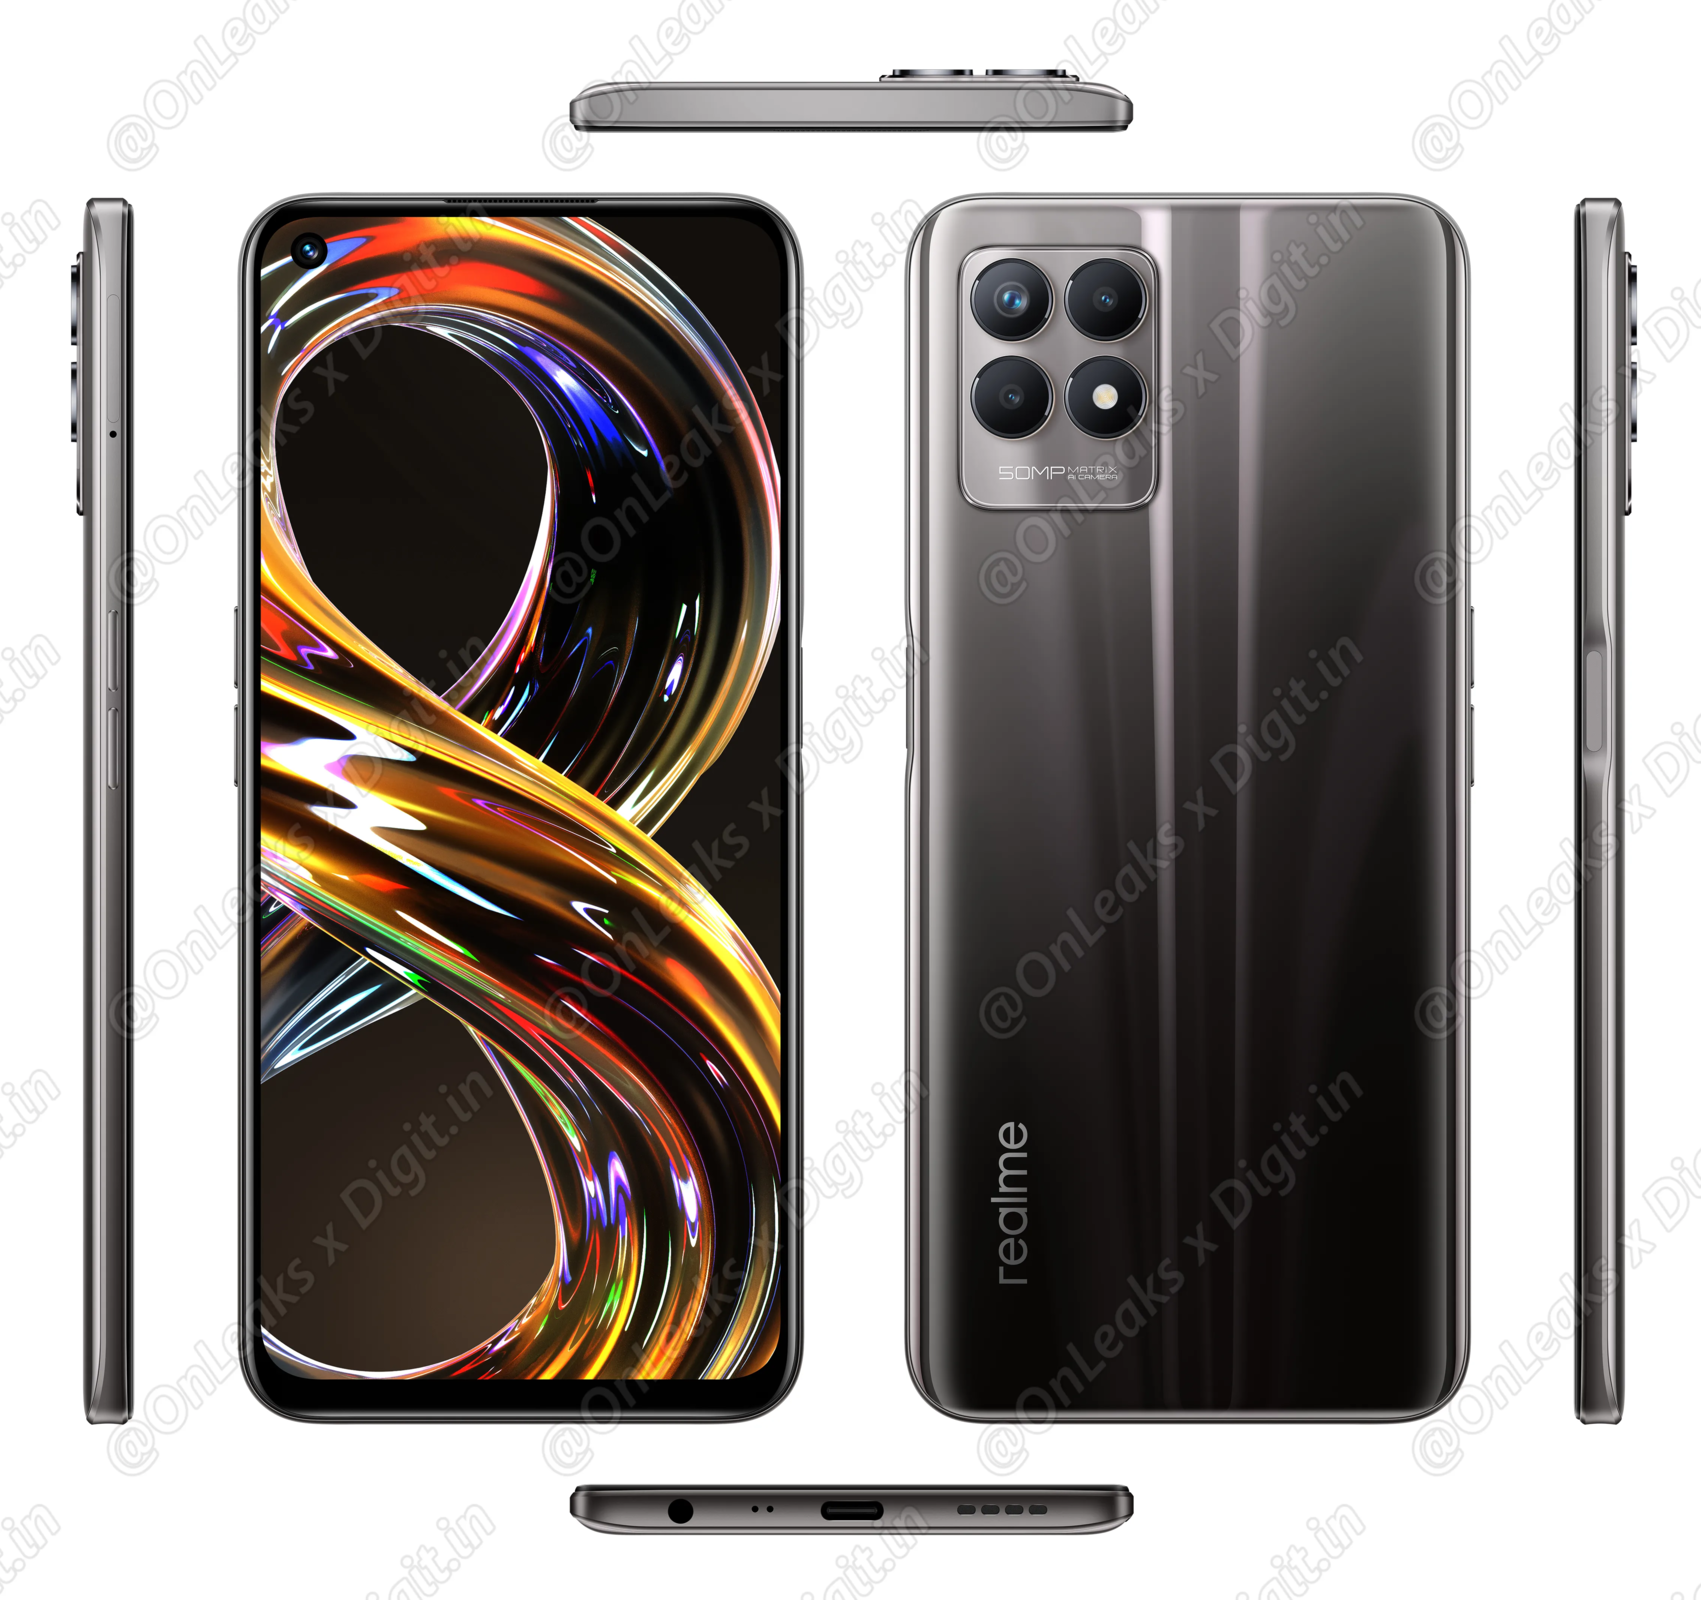 Realme 8i – Full Phone Specifications